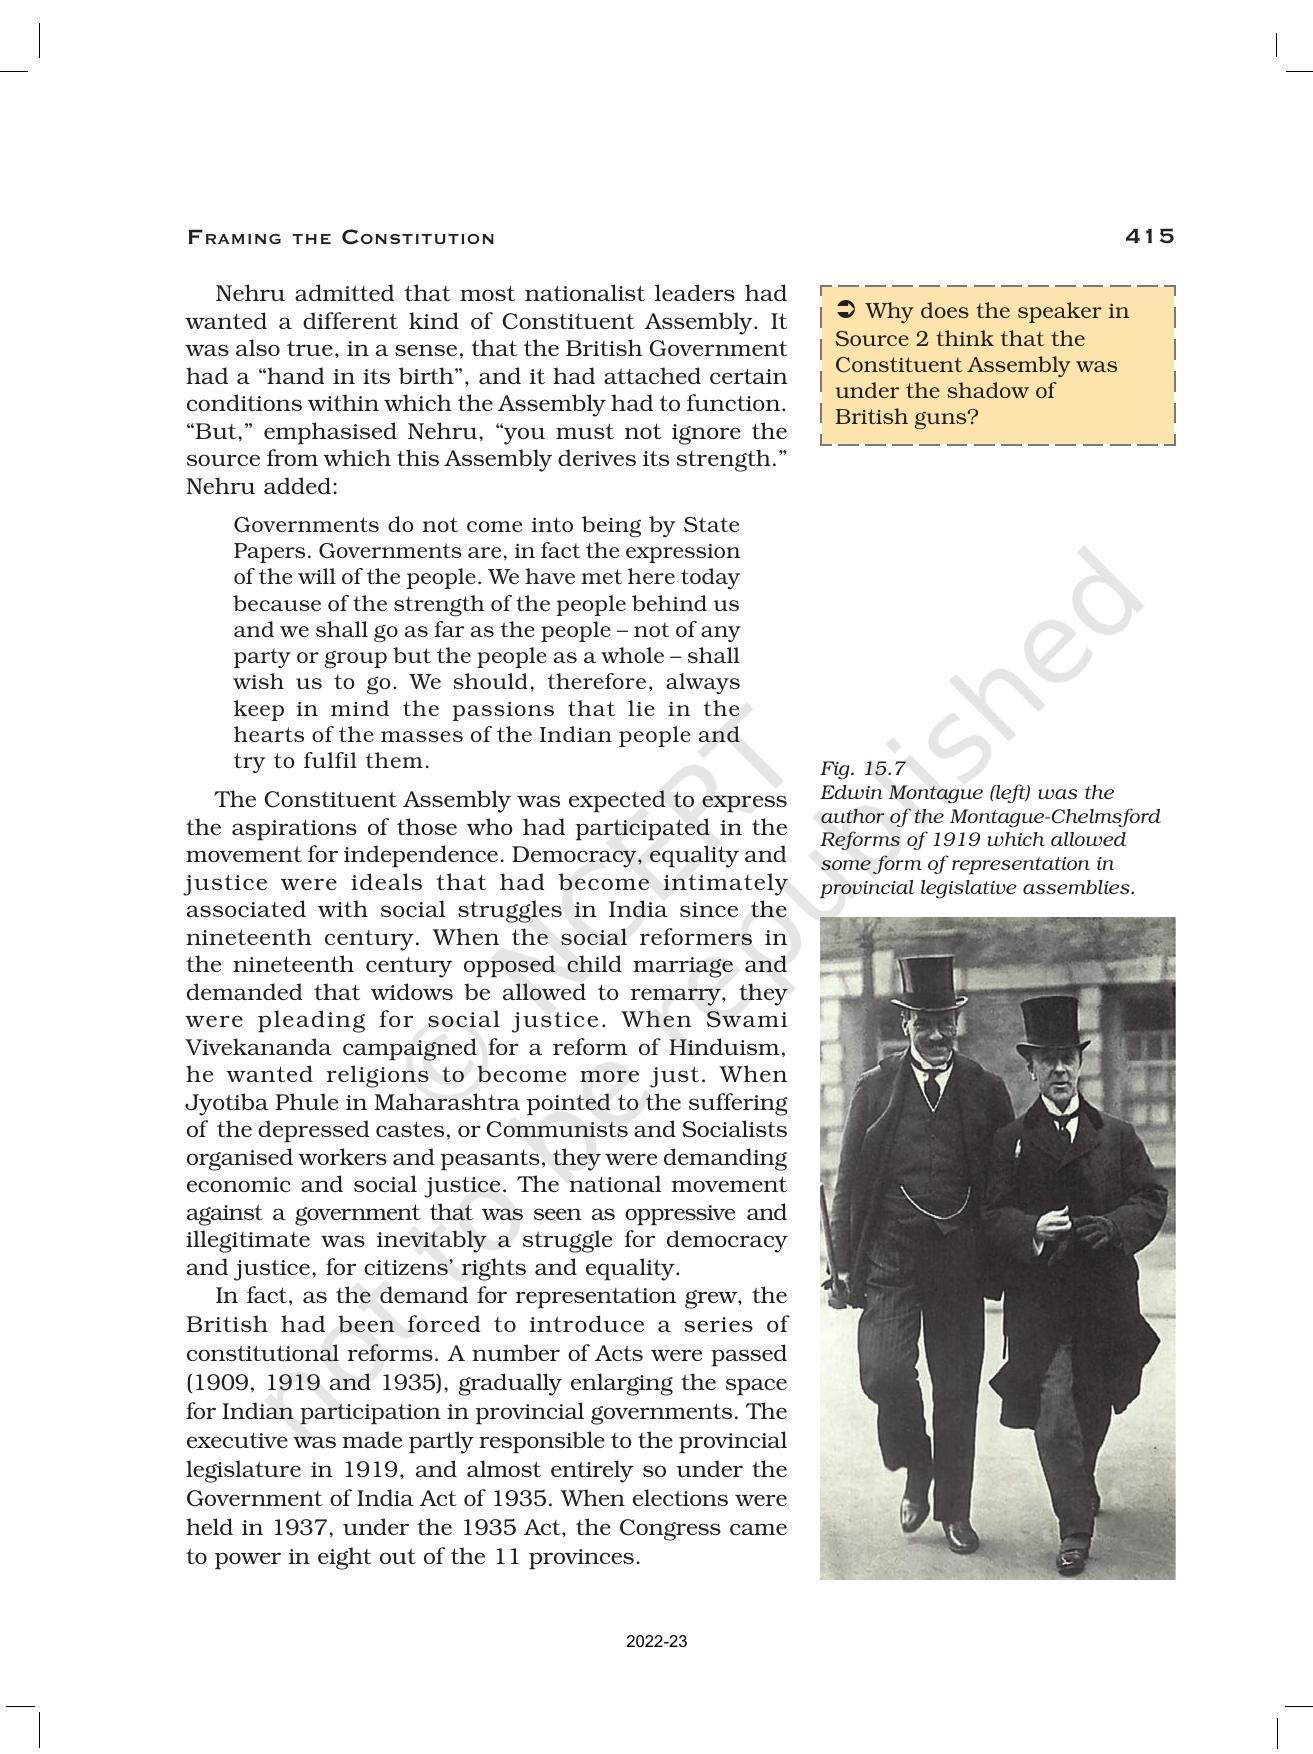 NCERT Book for Class 12 History (Part-III) Chapter 15 Framing and the Constitution - Page 11